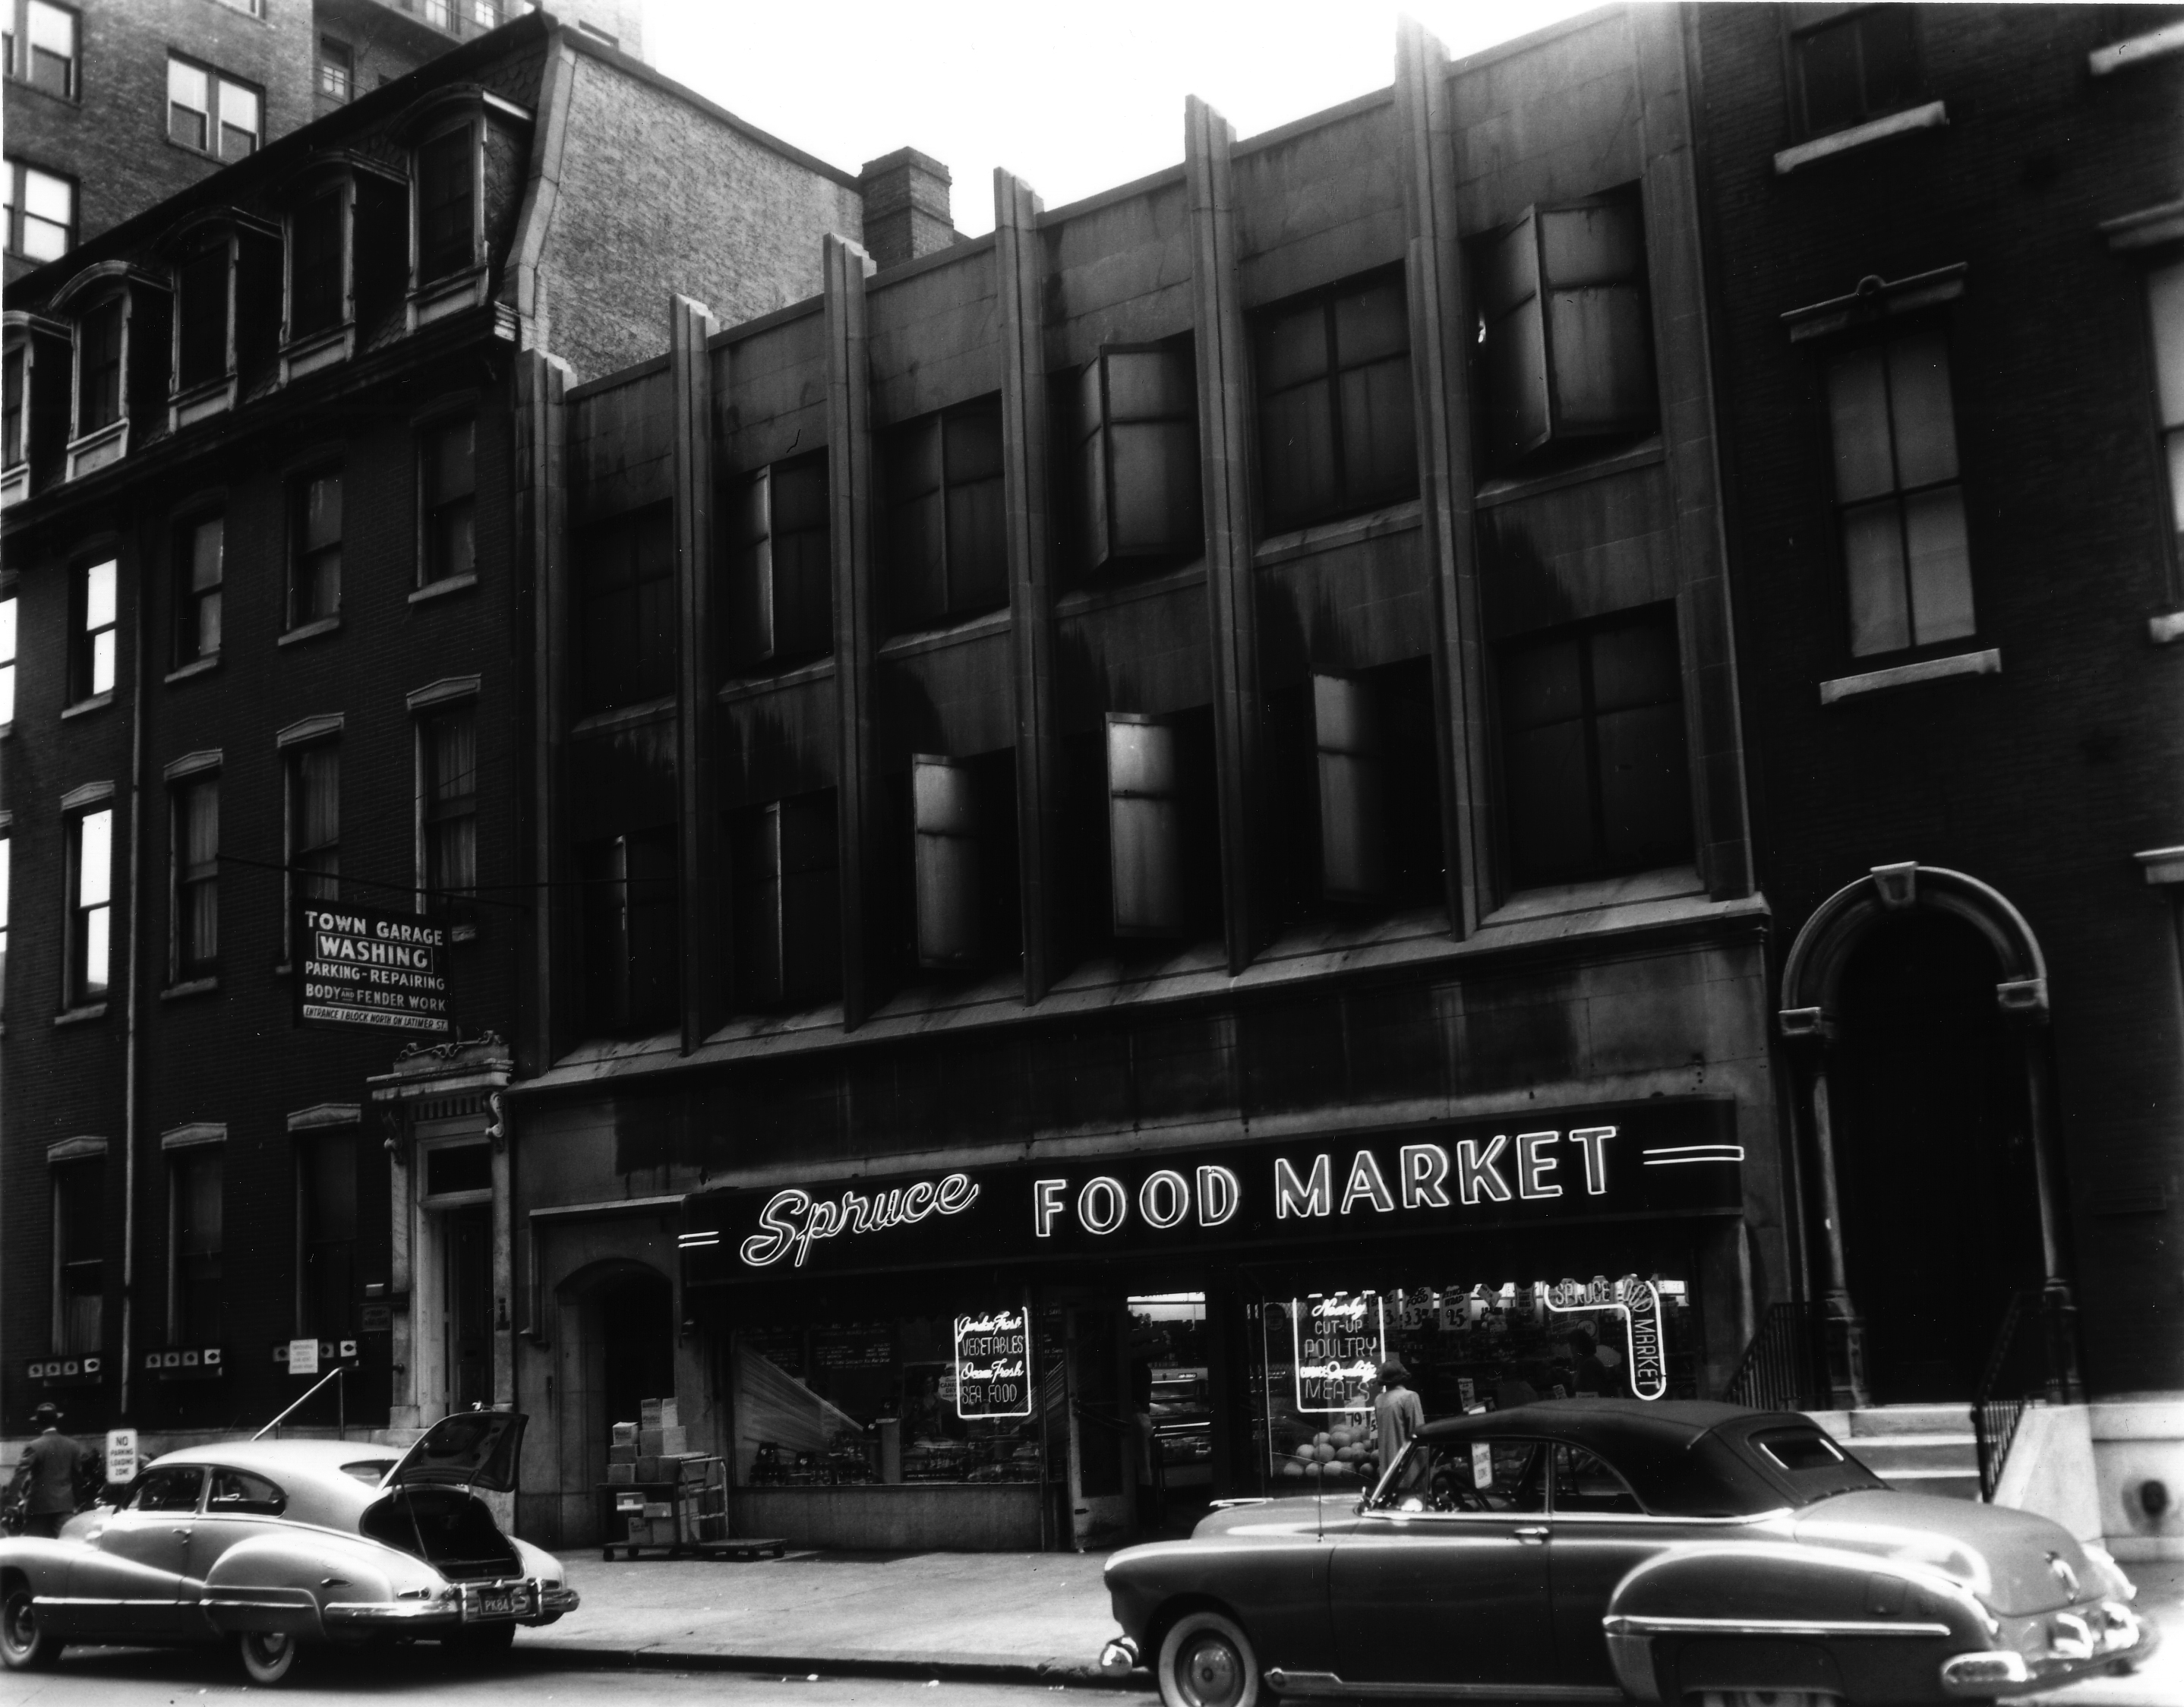 June 1, 1950, Spruce Food Market | Parker & Mullikin | Free Library of Philadelphia Print and Picture Collection